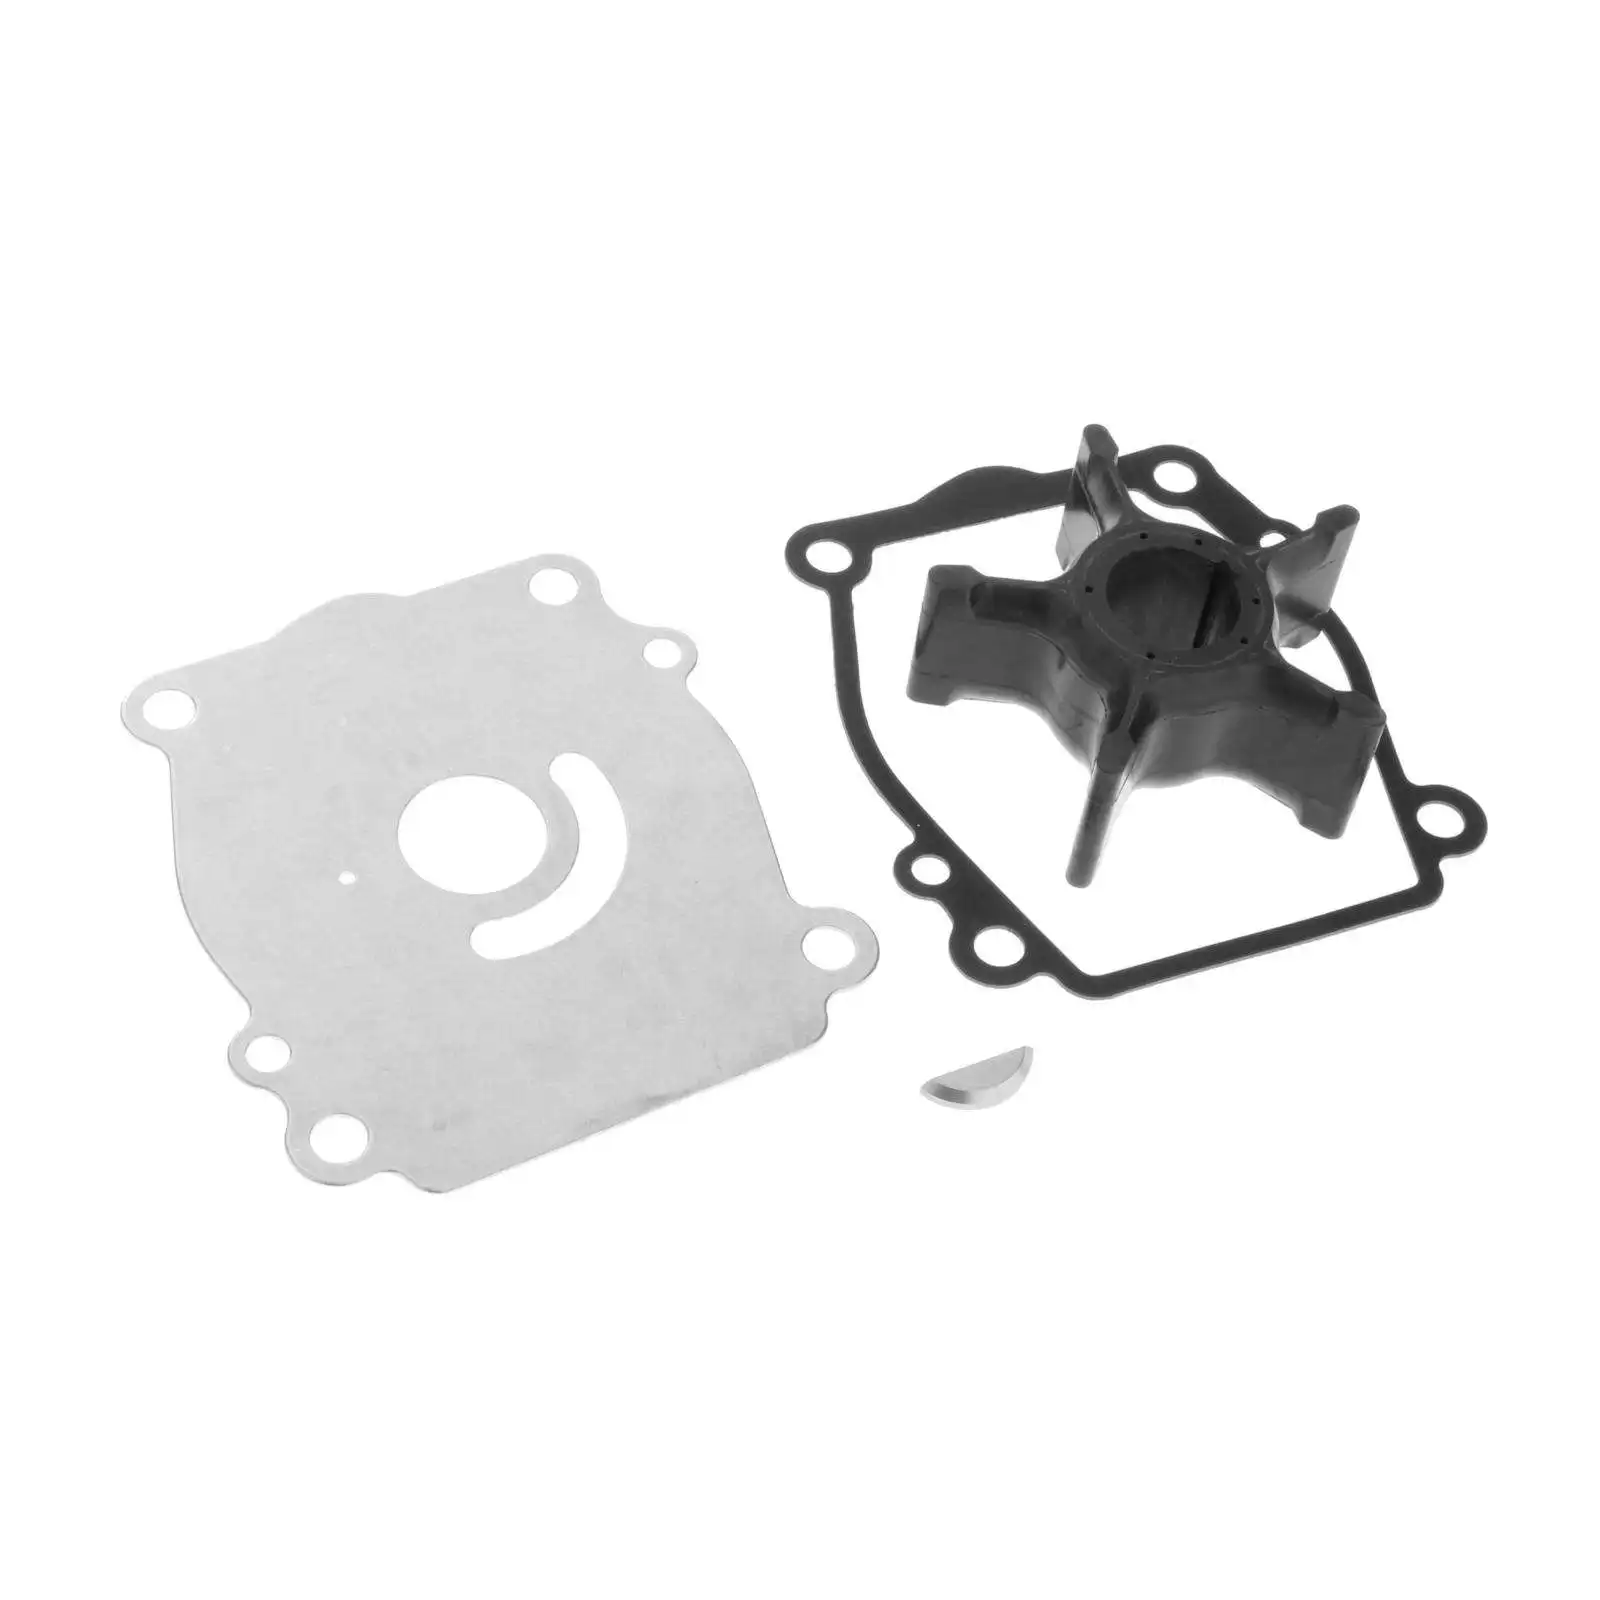 Water Pump Impeller Service Kit for Suzuki Outboard DT150-225 18-3253 17400-87D11 Model Replace Parts Acc 1 Set